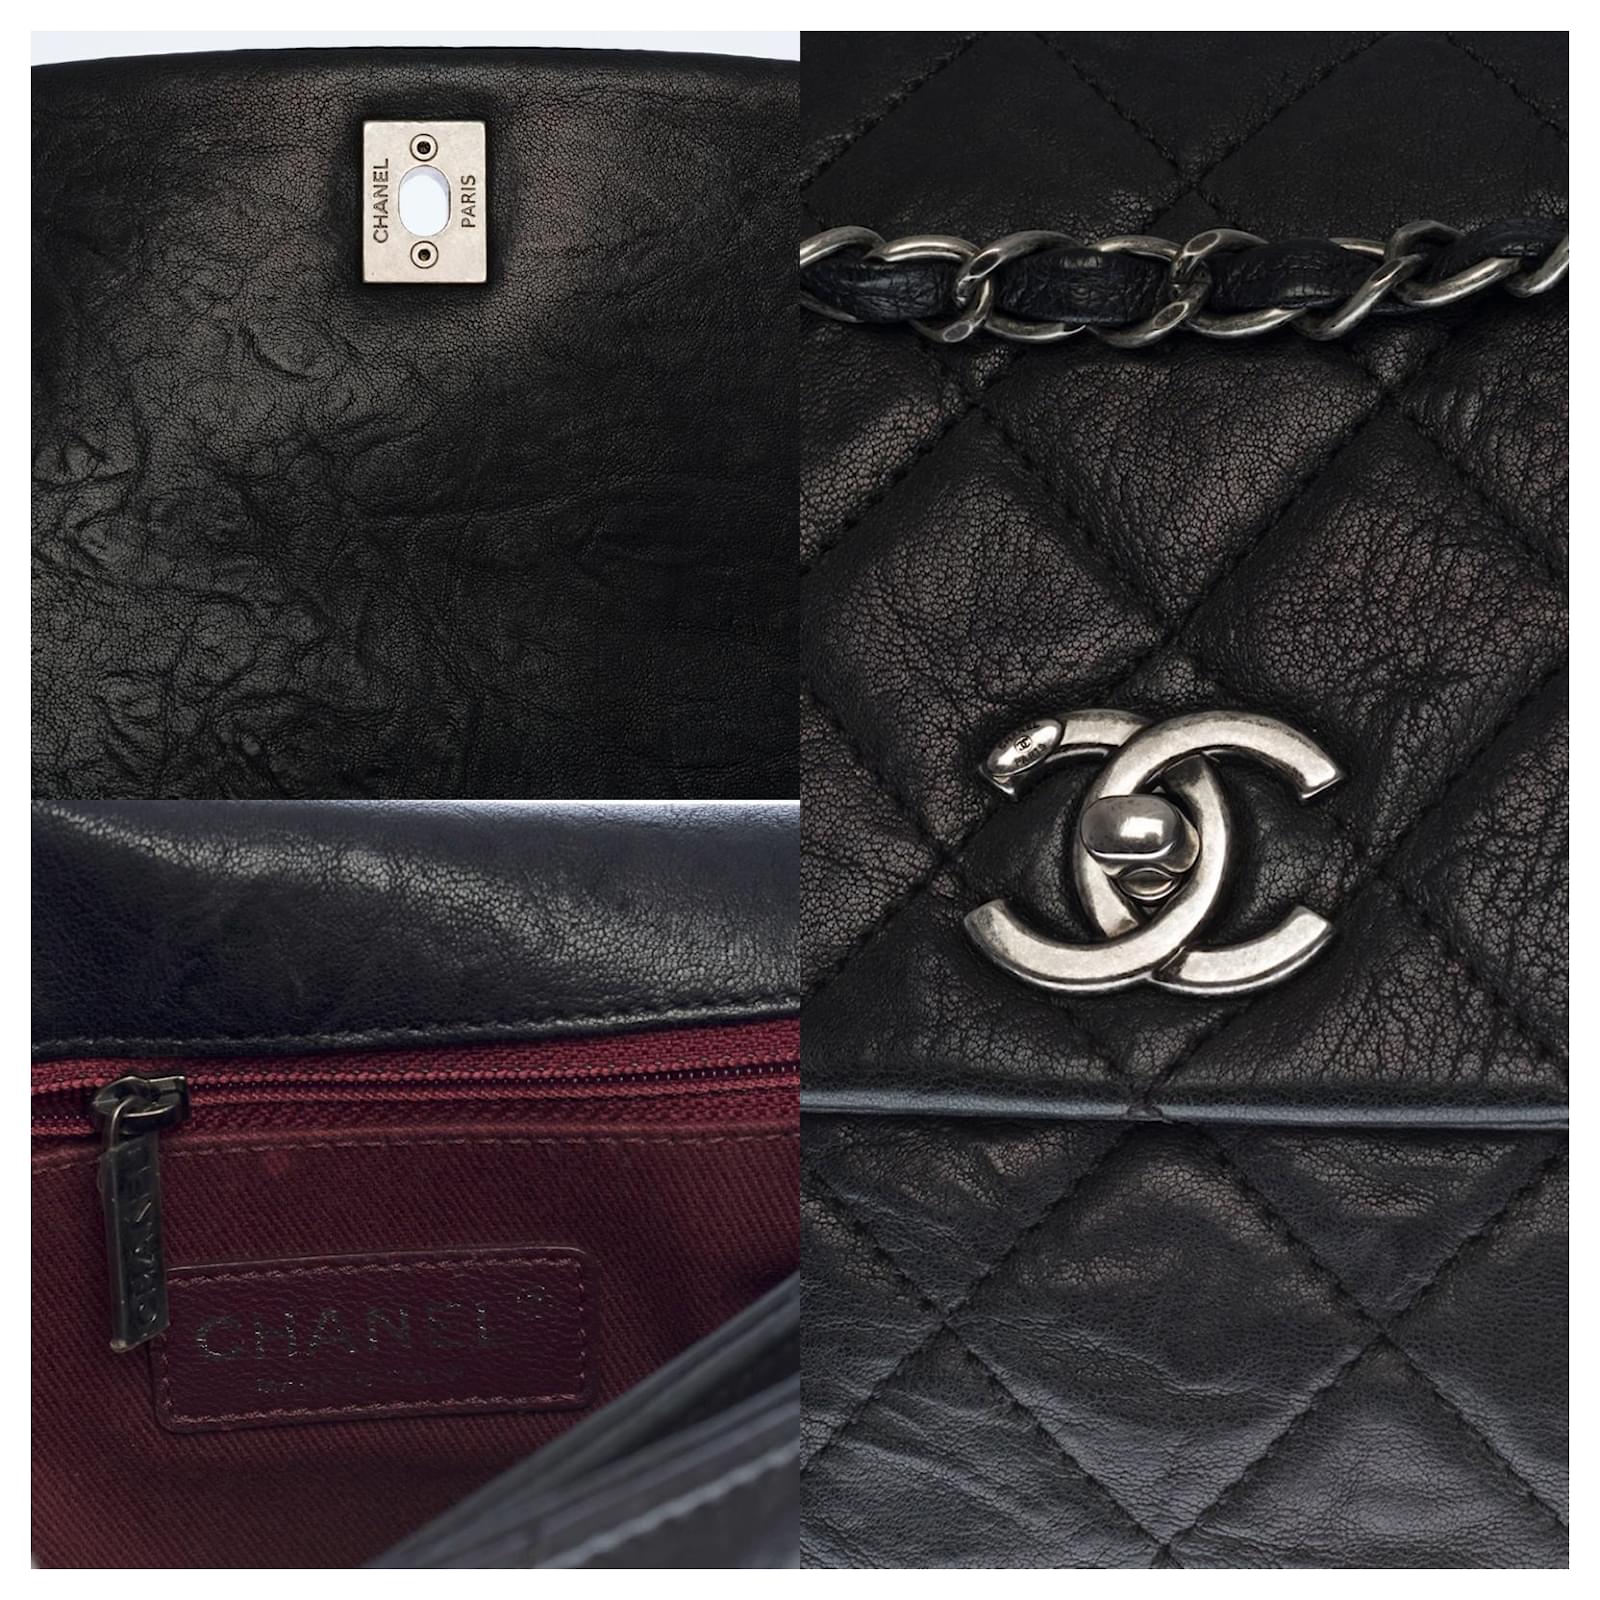 Timeless Very chic and Rare classic Chanel shoulder bag 31 rue